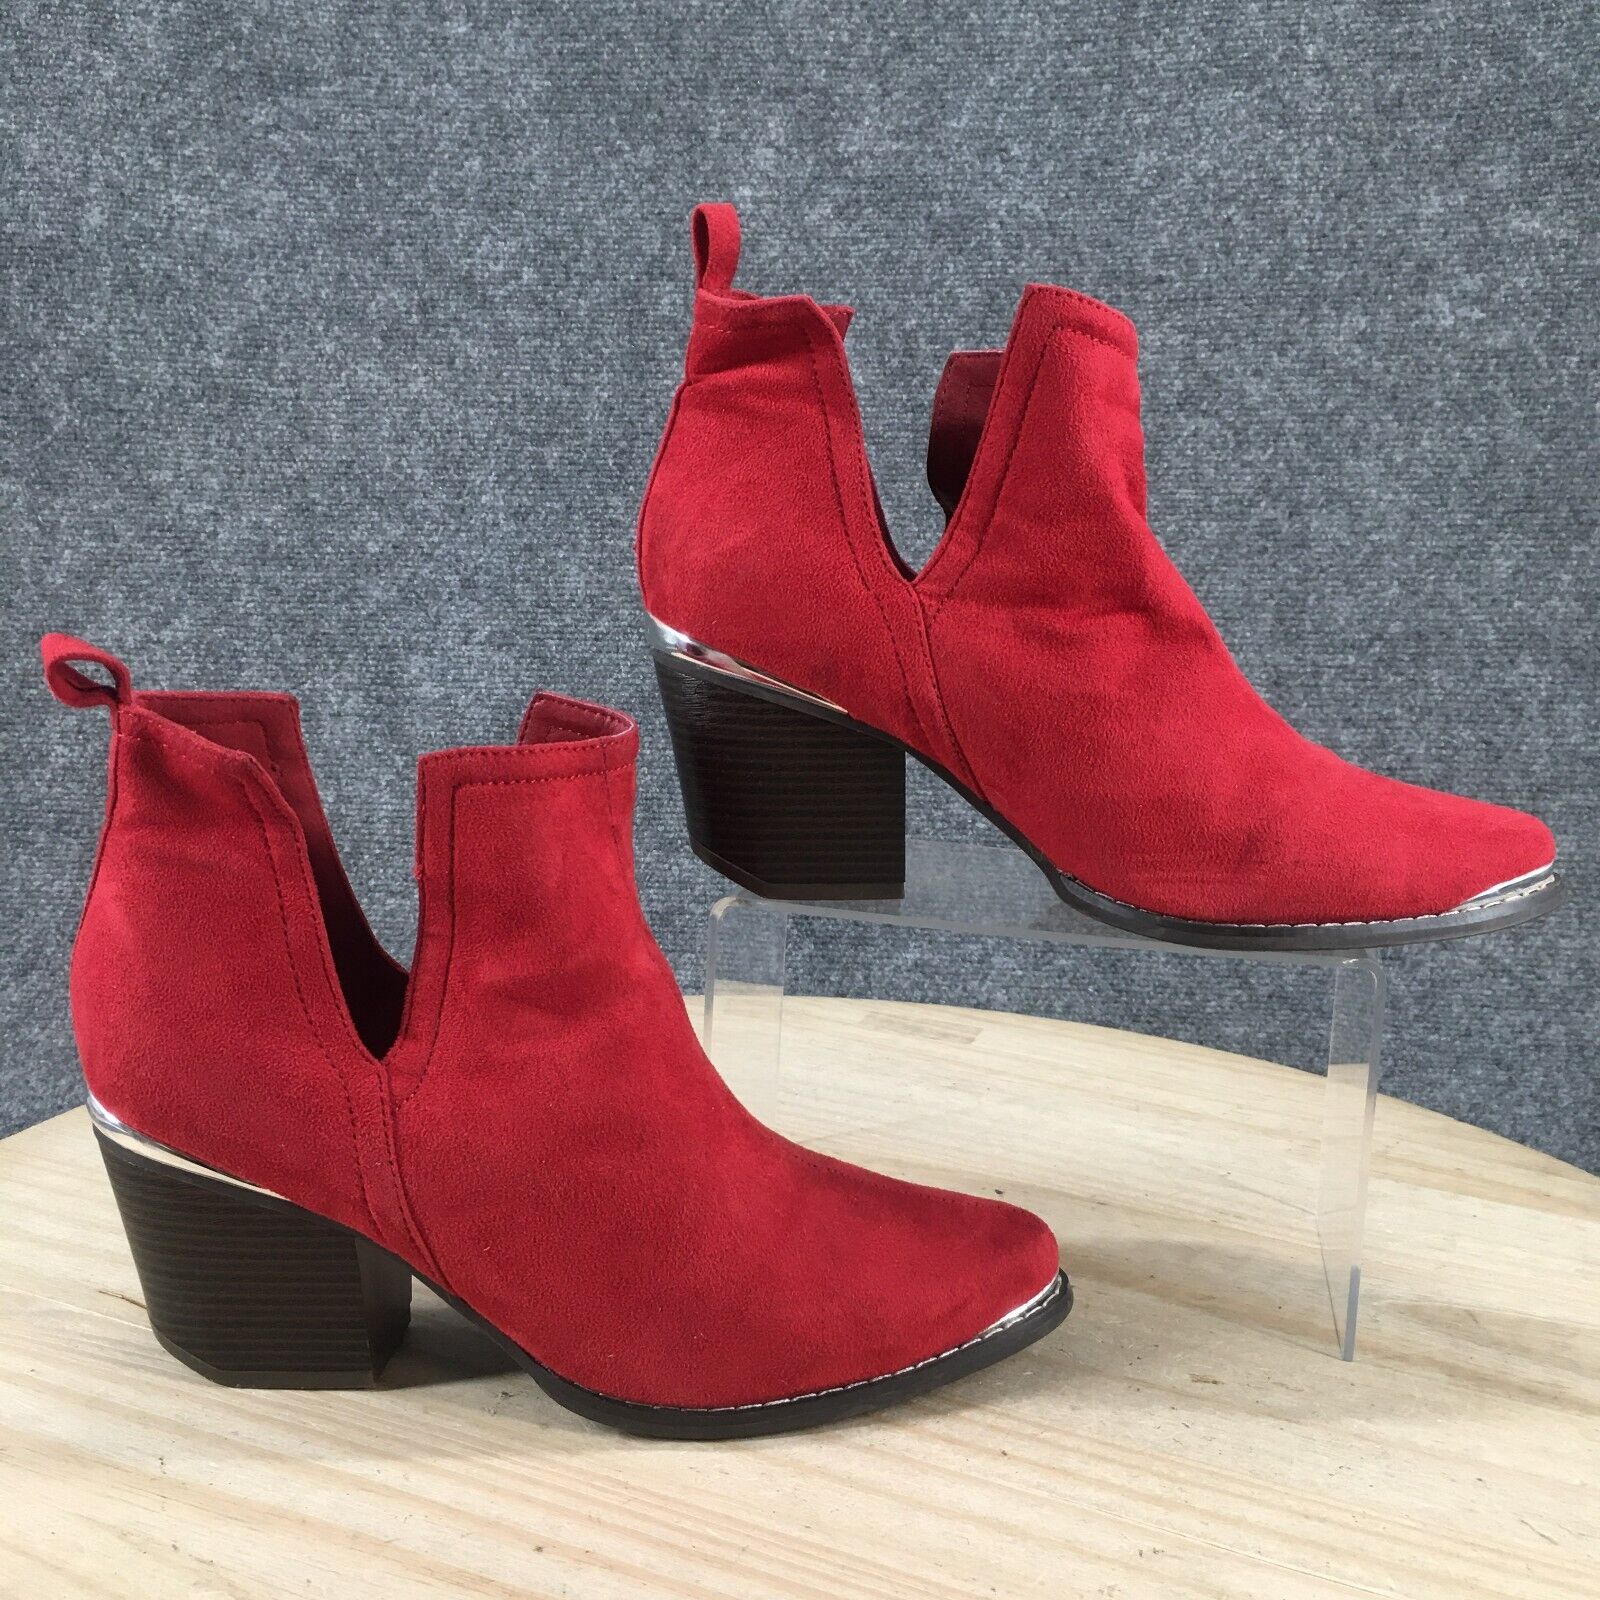 Journee Collection Boots Womens 7.5 Issla Ankle Booties Red Faux Leather Block